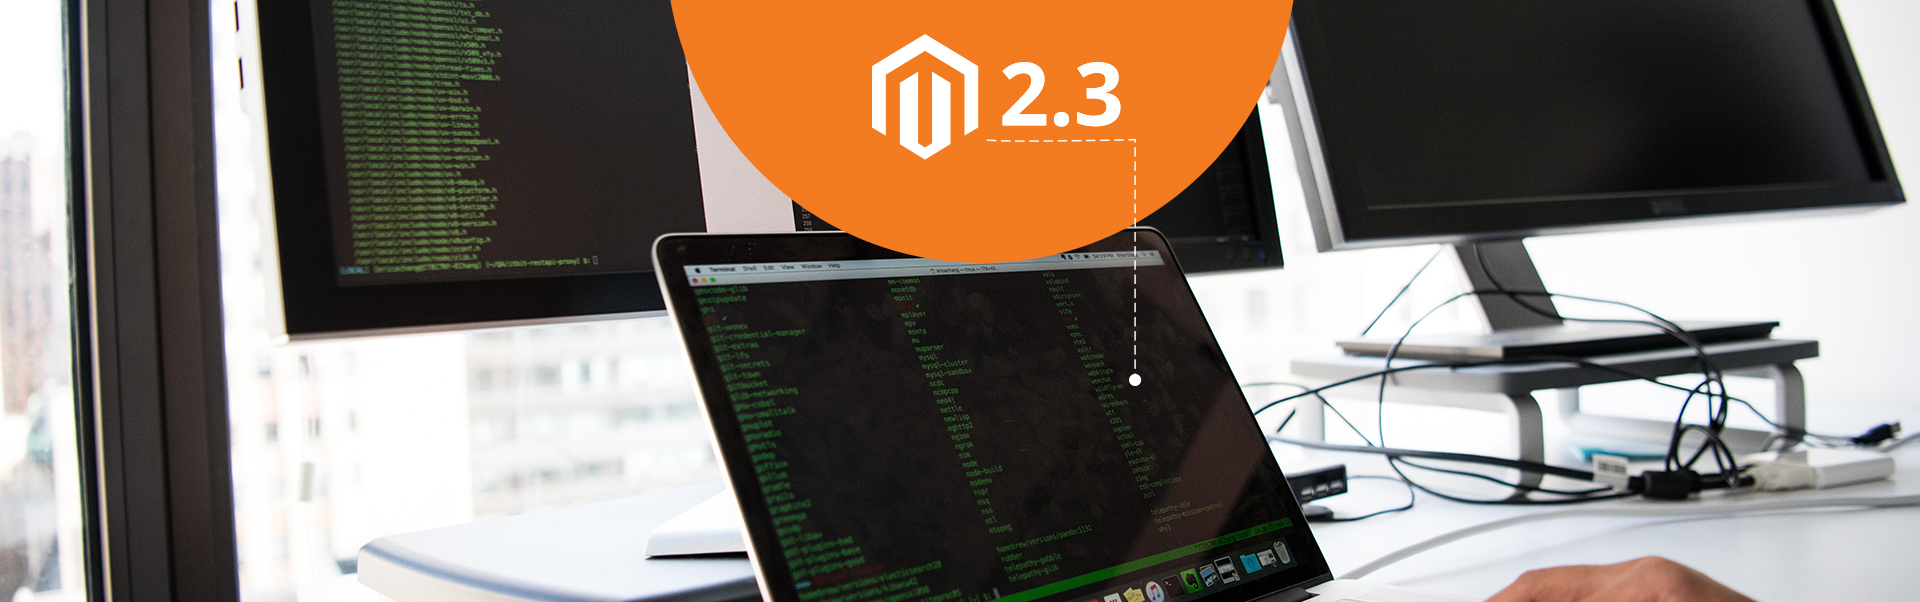 whats-new-in-magento-2-3-what-changes-can-you-expect